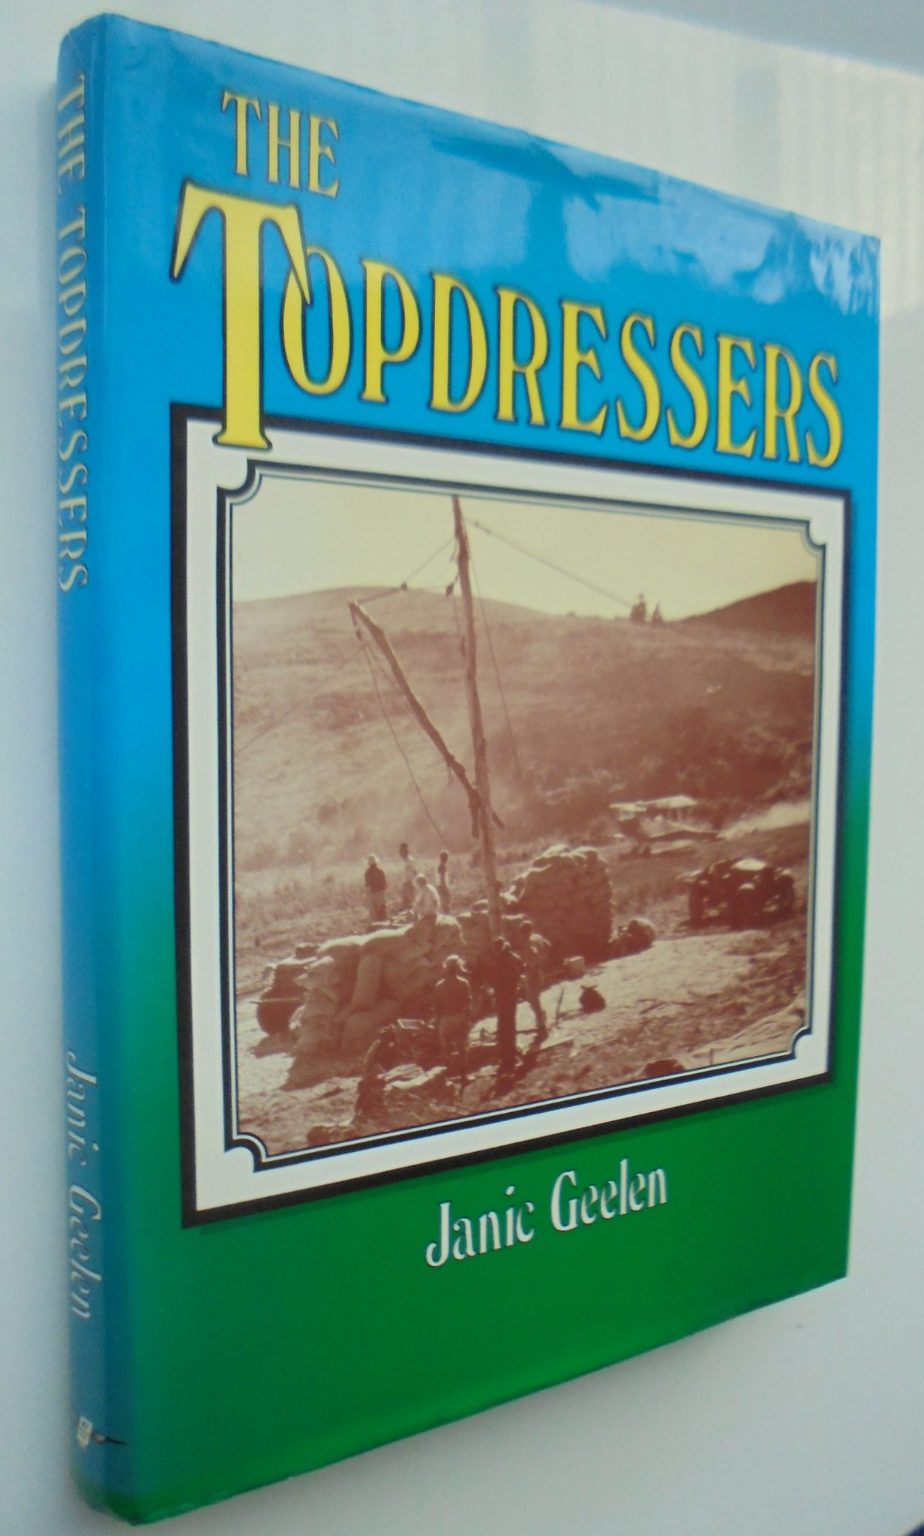 The Topdressers By Janic Geelen. LIMITED EDITION.  of 700 copies. VERY SCARCE. SIGNED BY AUTHOR.